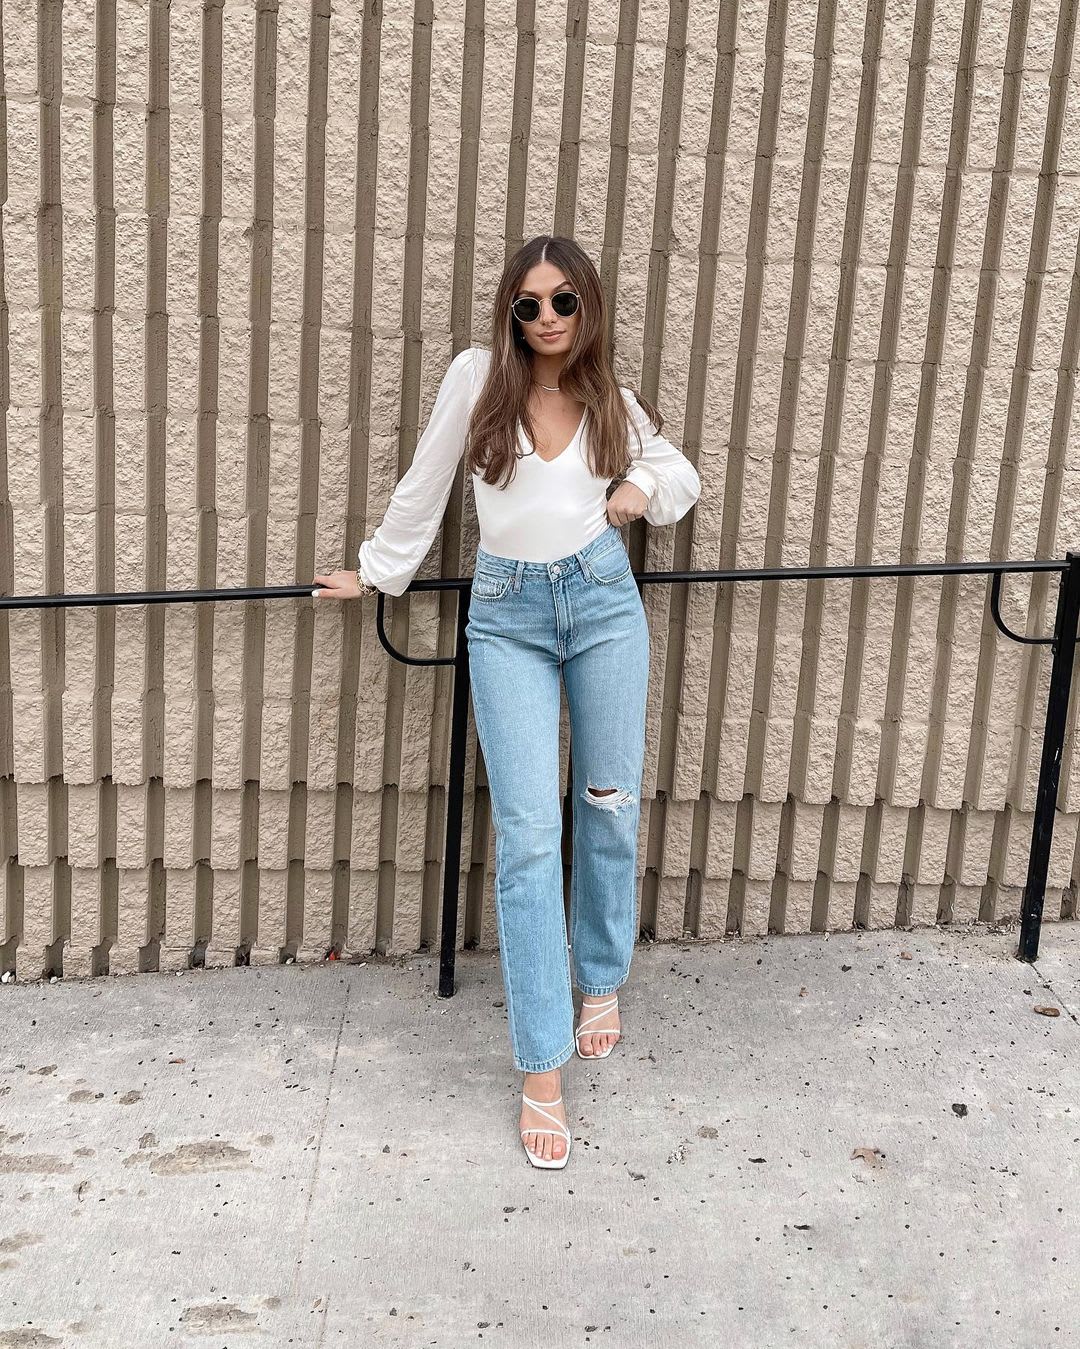 23 bodysuit outfit ideas  How to style bodysuits for every occasion